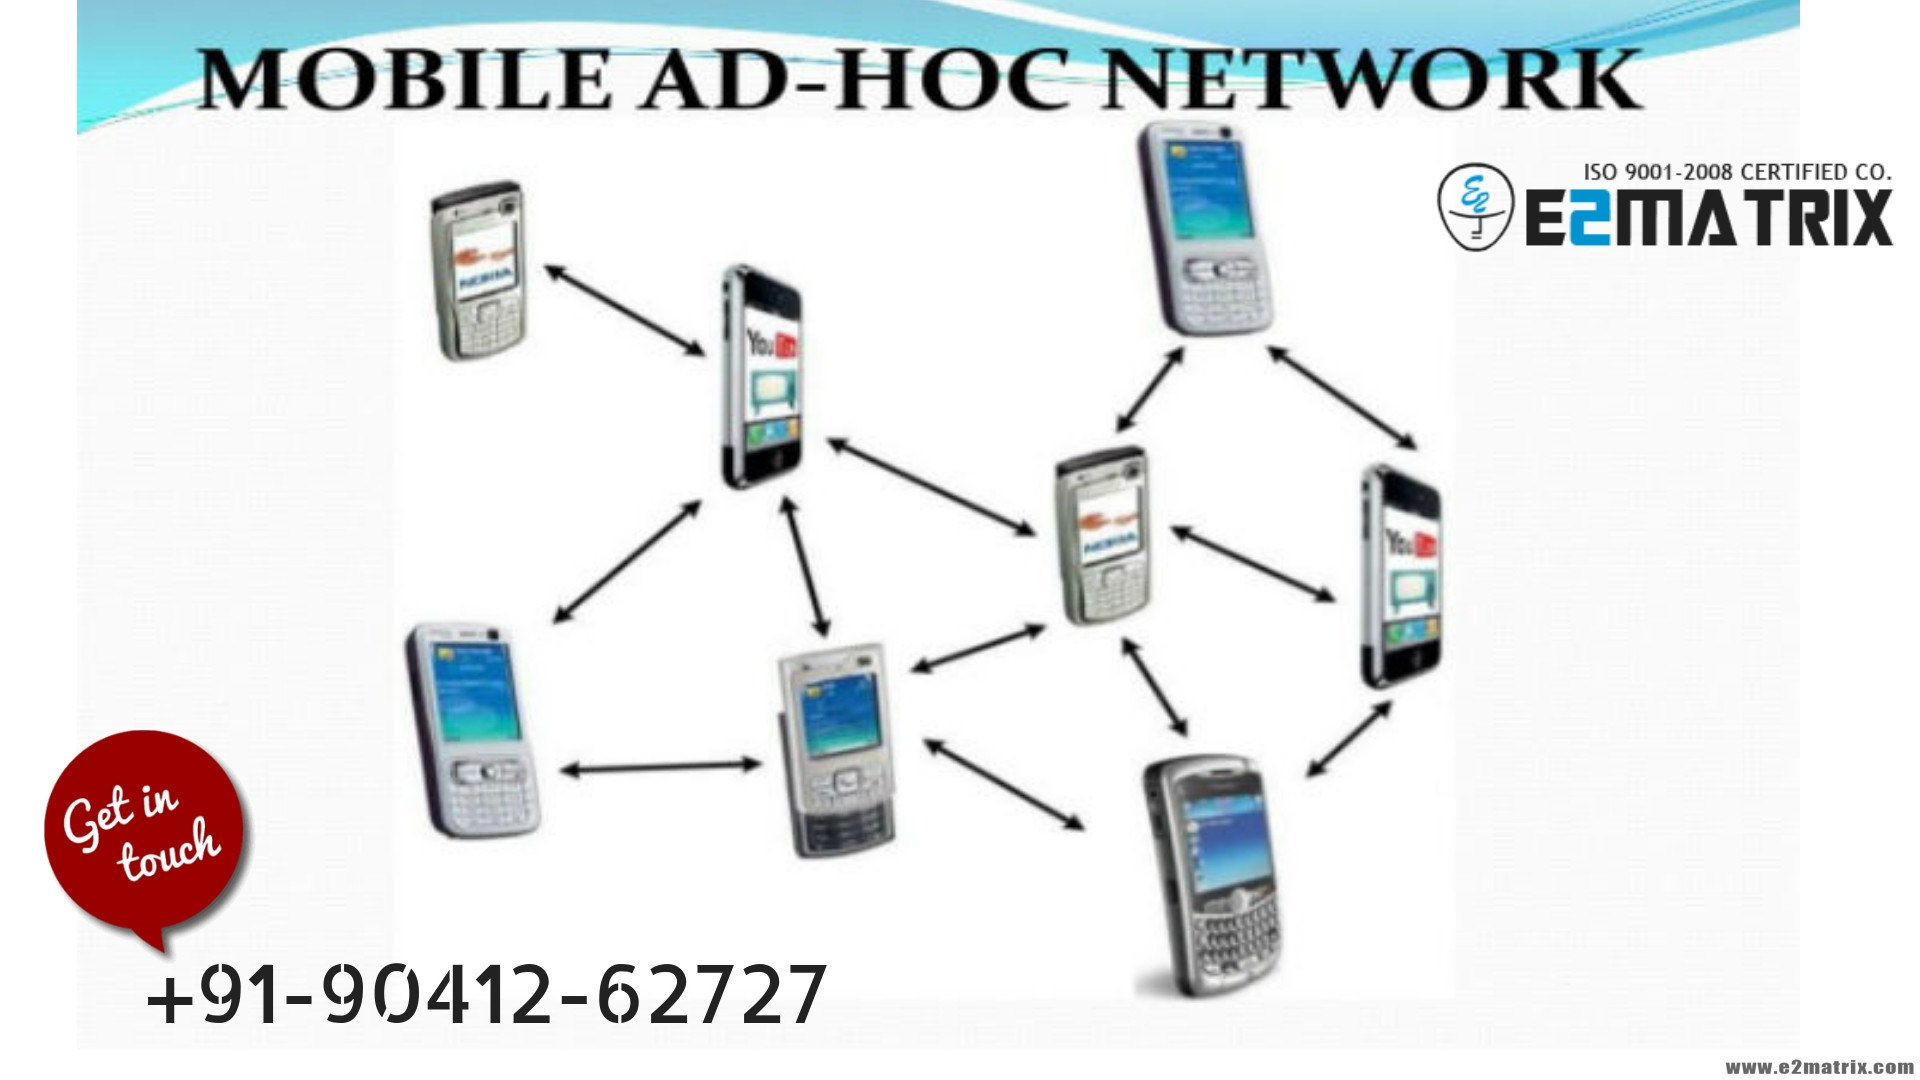 Mobile ad hoc networks (MANET) topics thesis help and research guidance